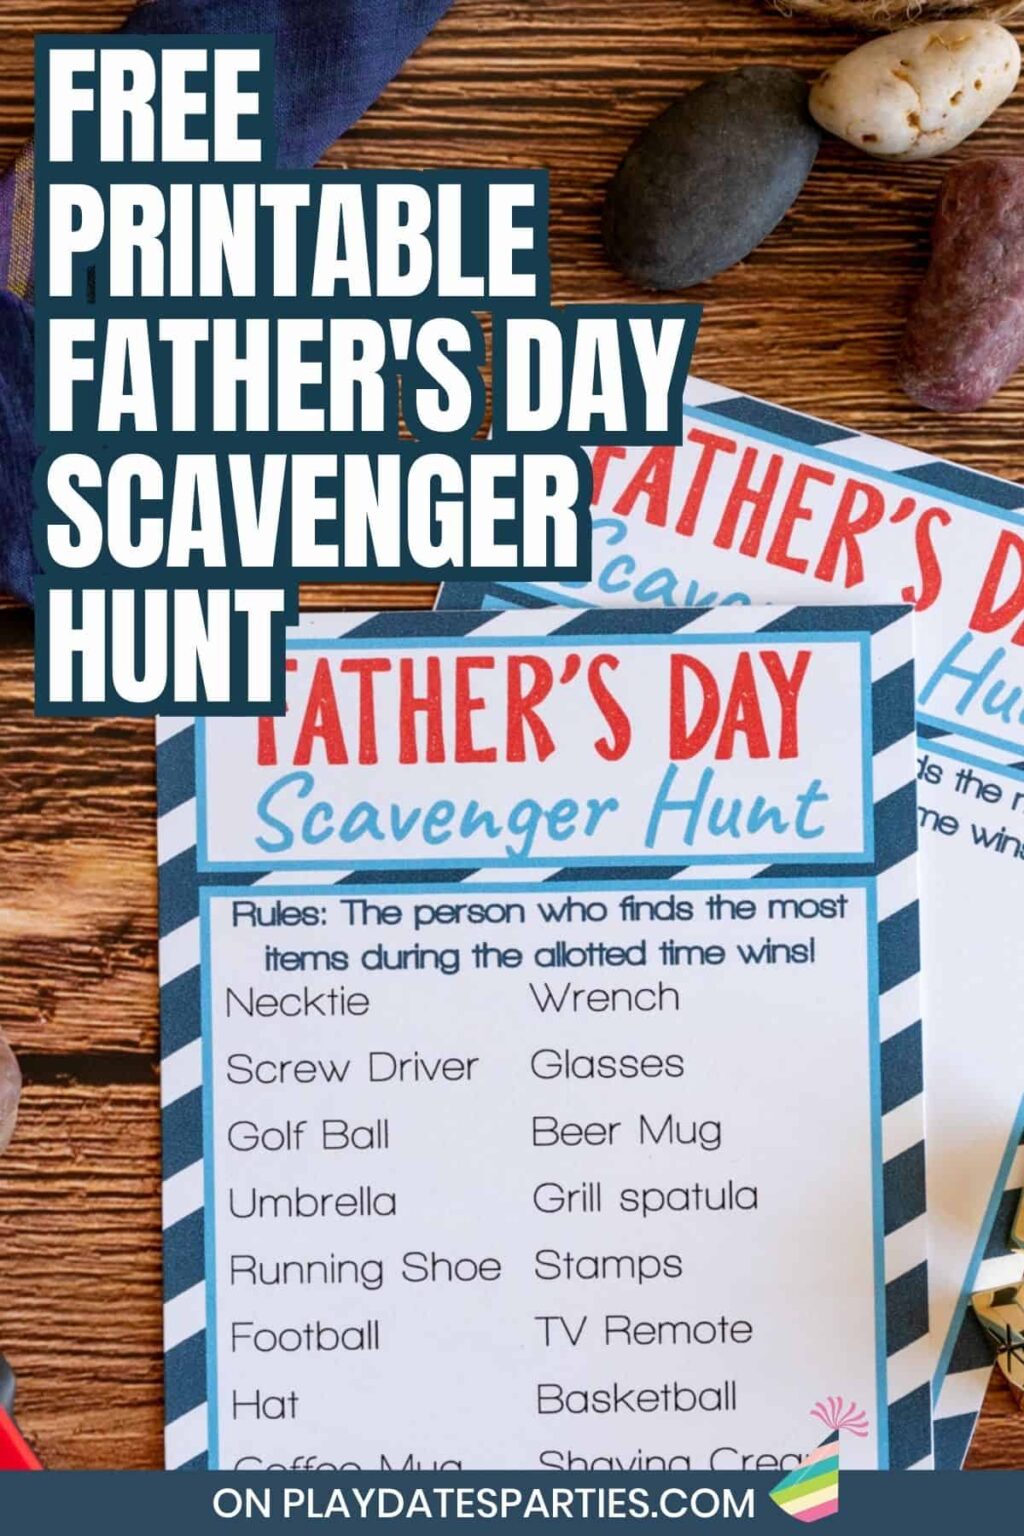 free-printable-father-s-day-scavenger-hunt